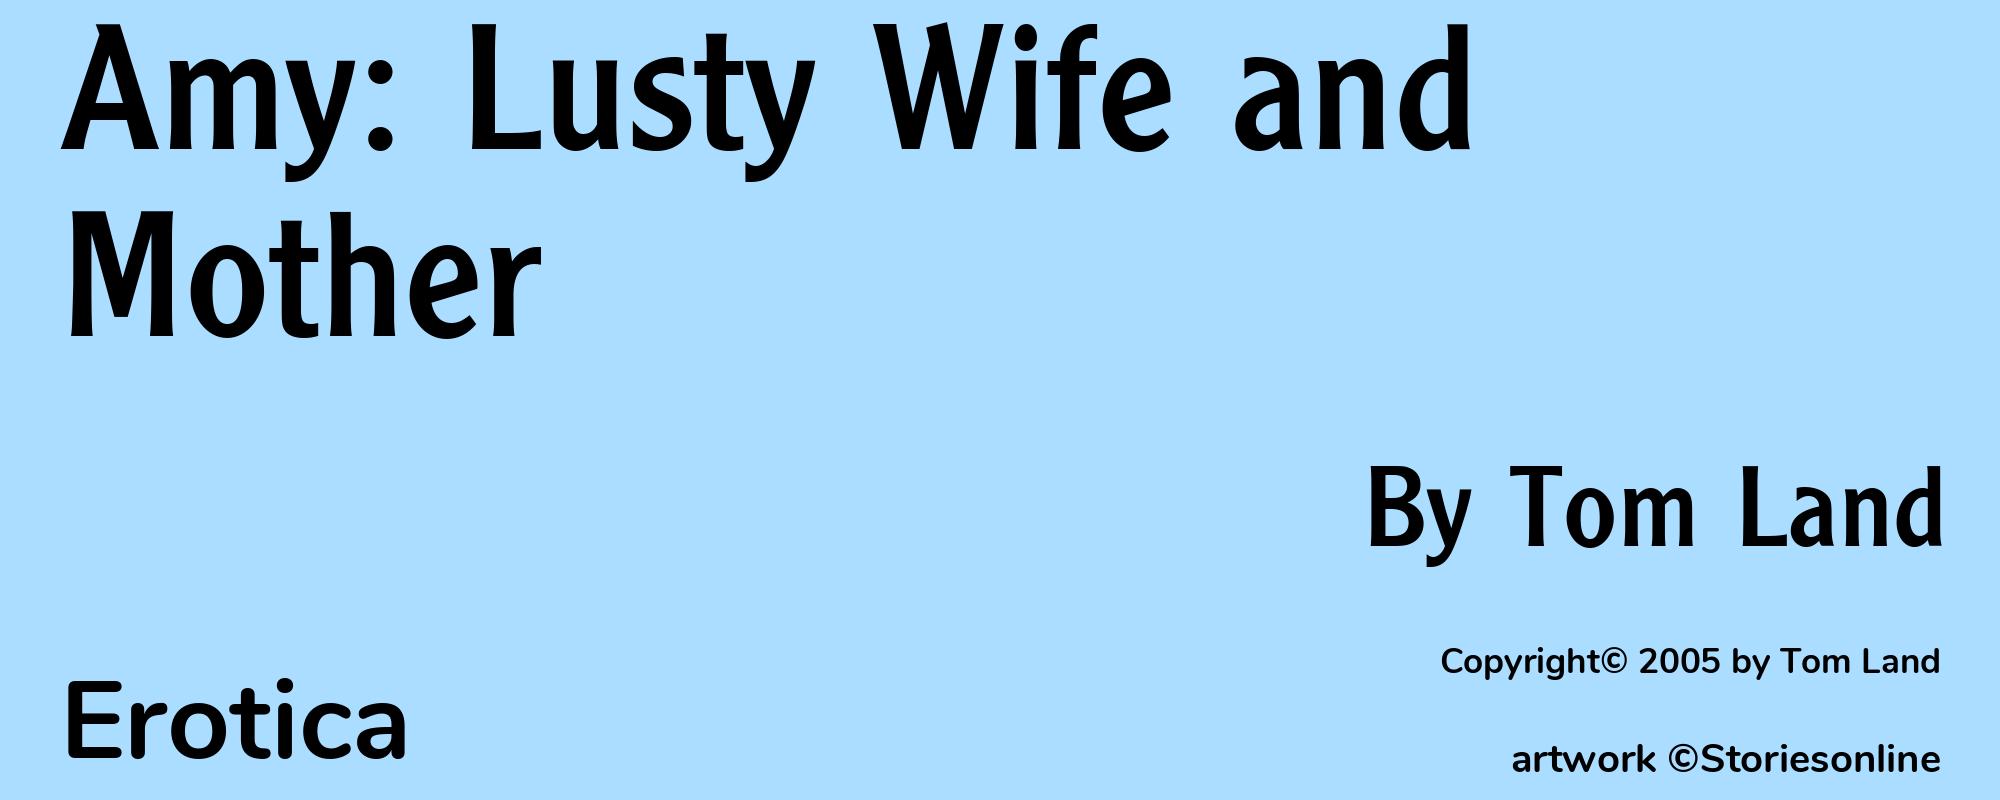 Amy: Lusty Wife and Mother - Cover